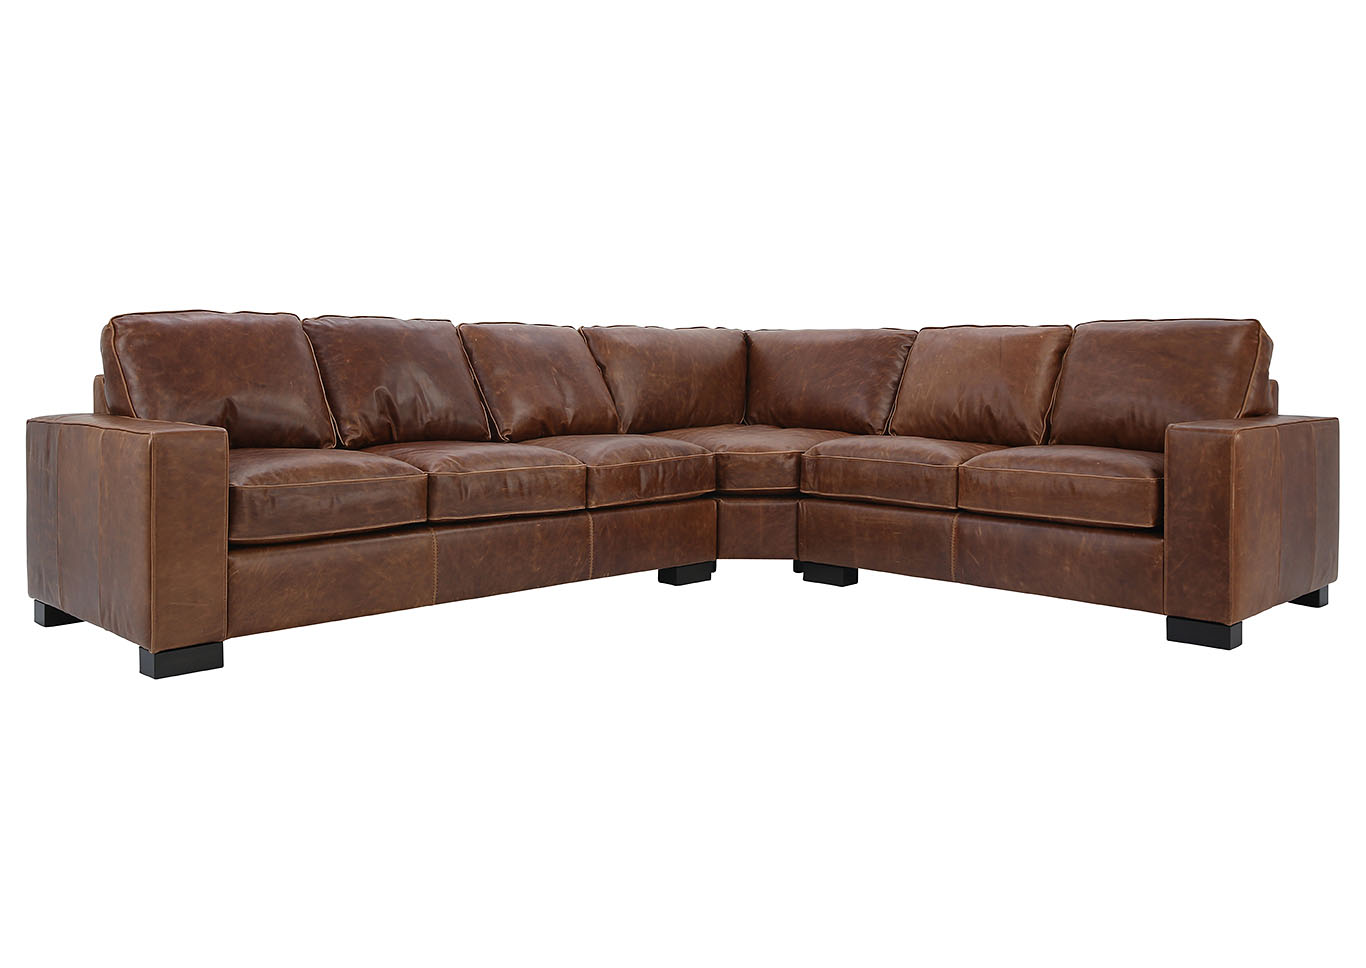 CHARLEY CHOCOLATE LEATHER 3 PIECE SECTIONAL